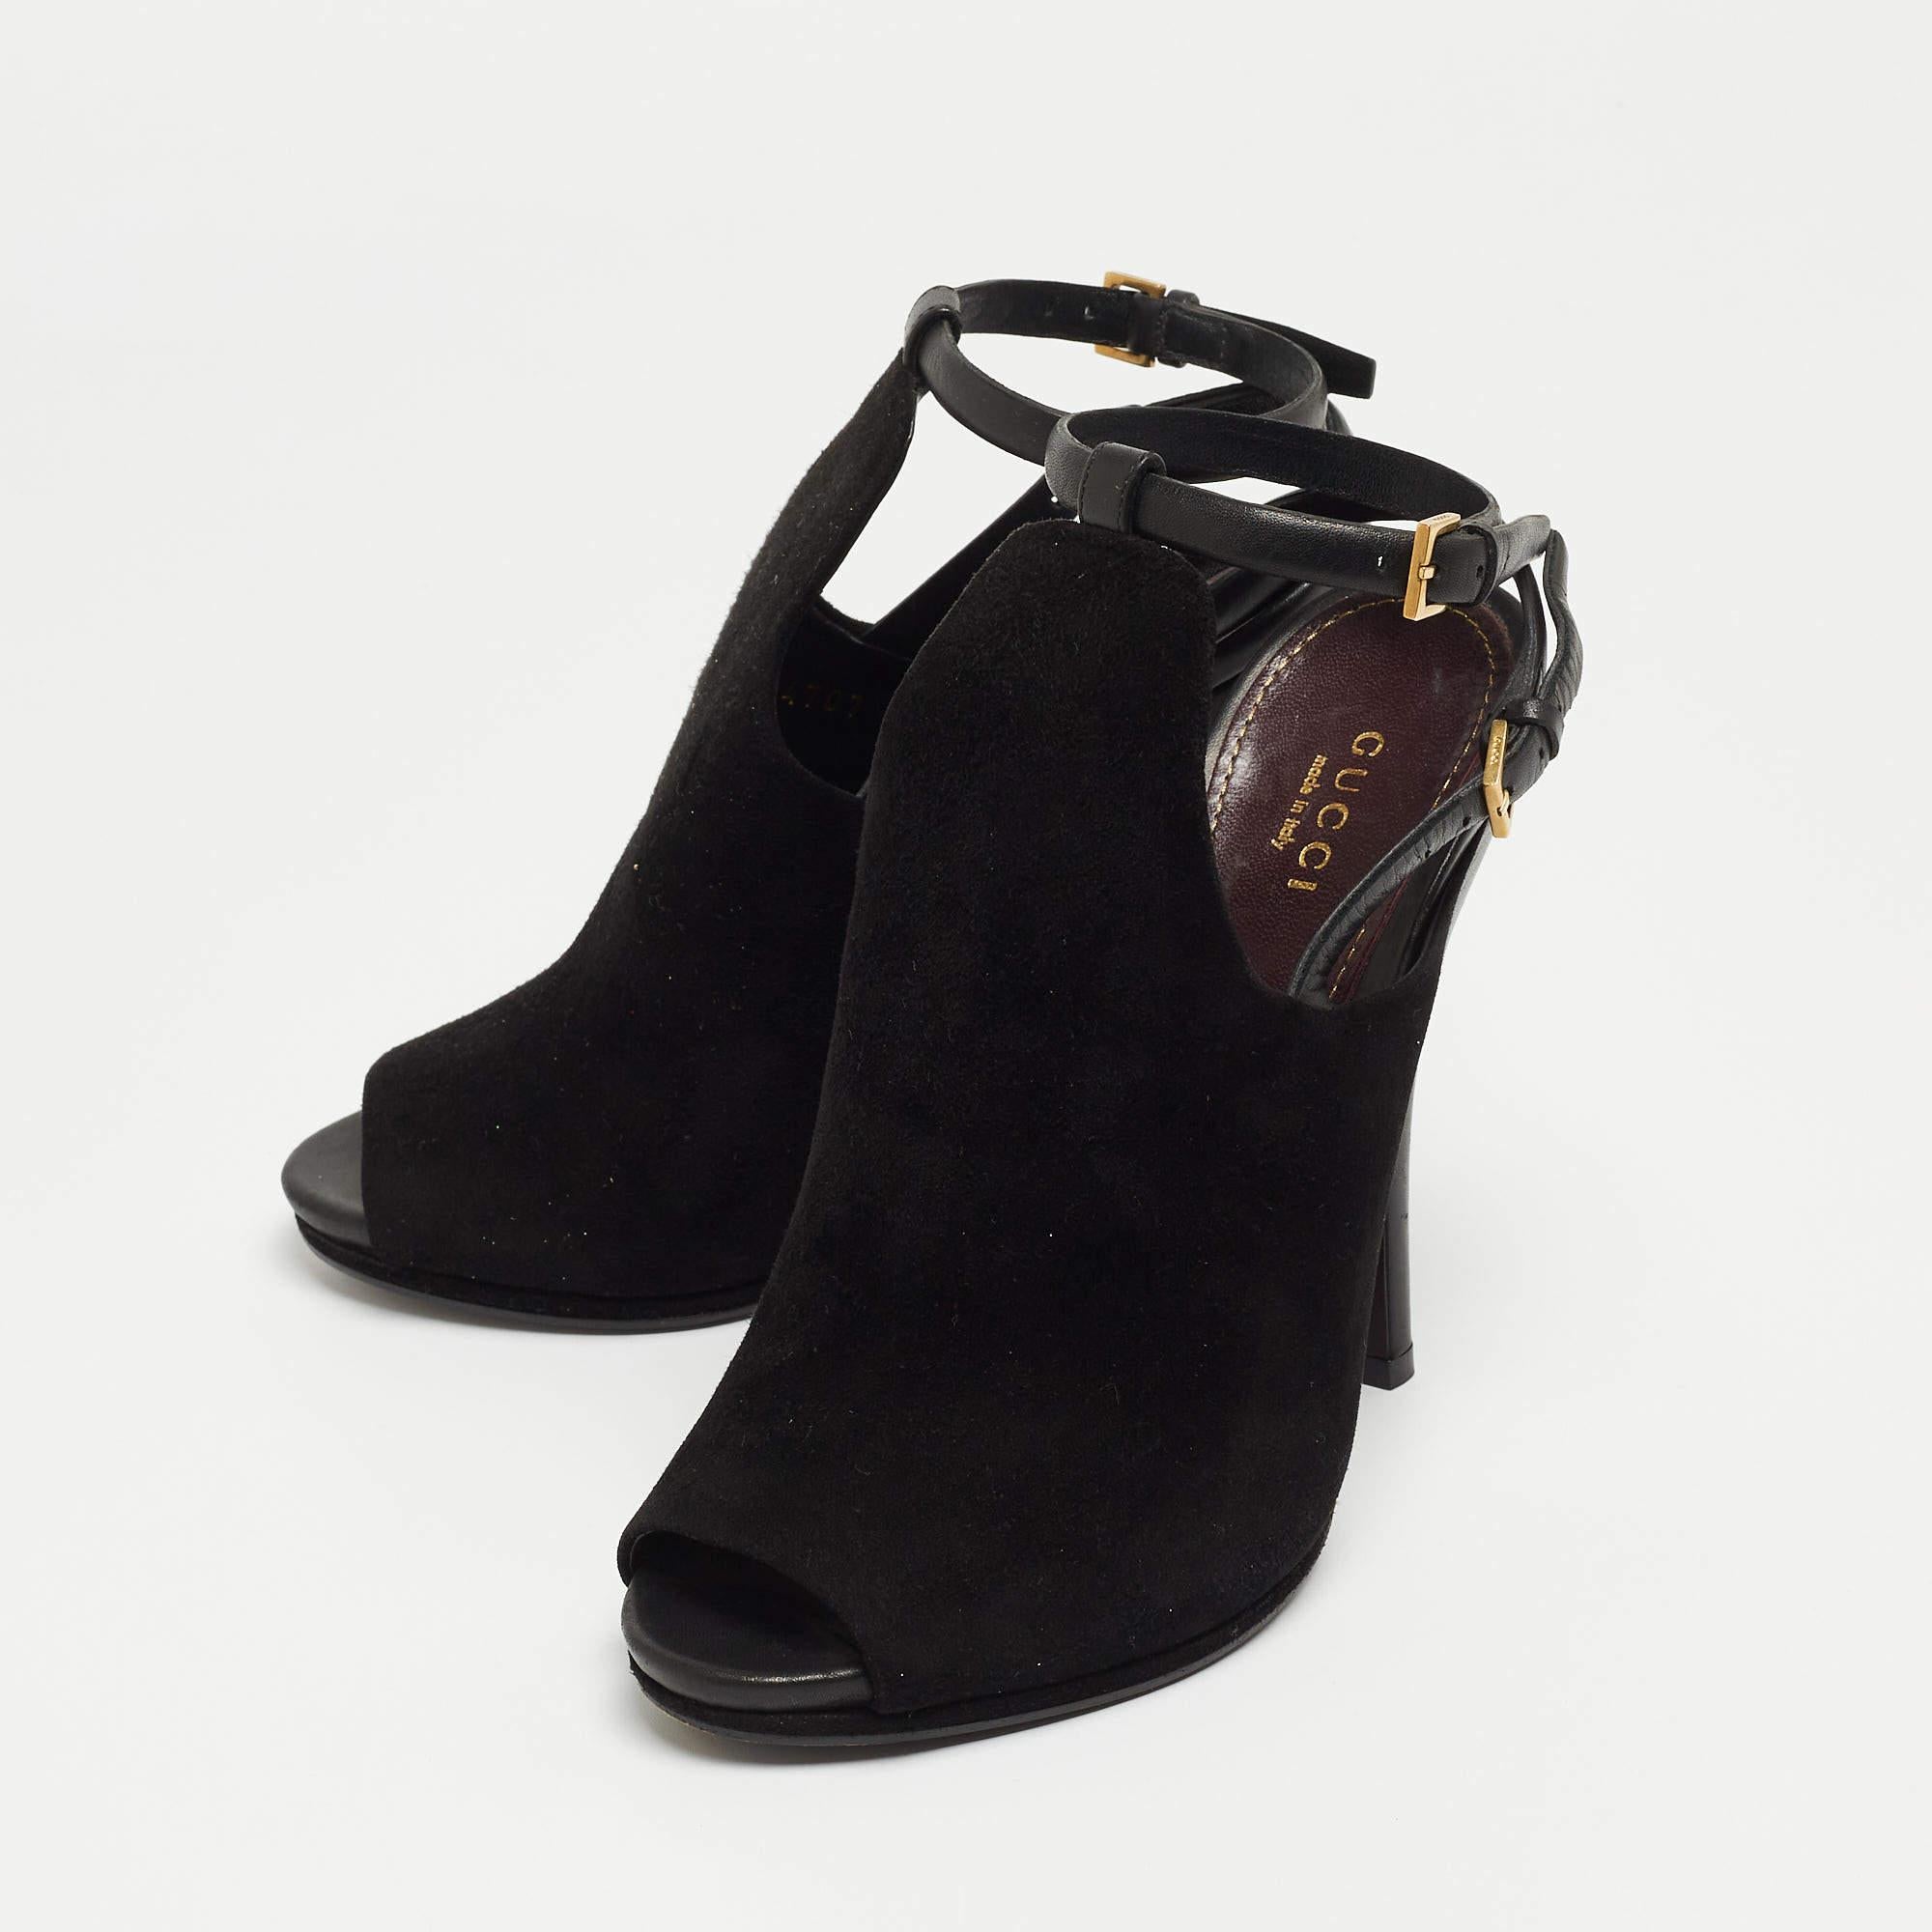 Gucci Black Suede Jane Peep Toe Booties Size 37.5 For Sale 1